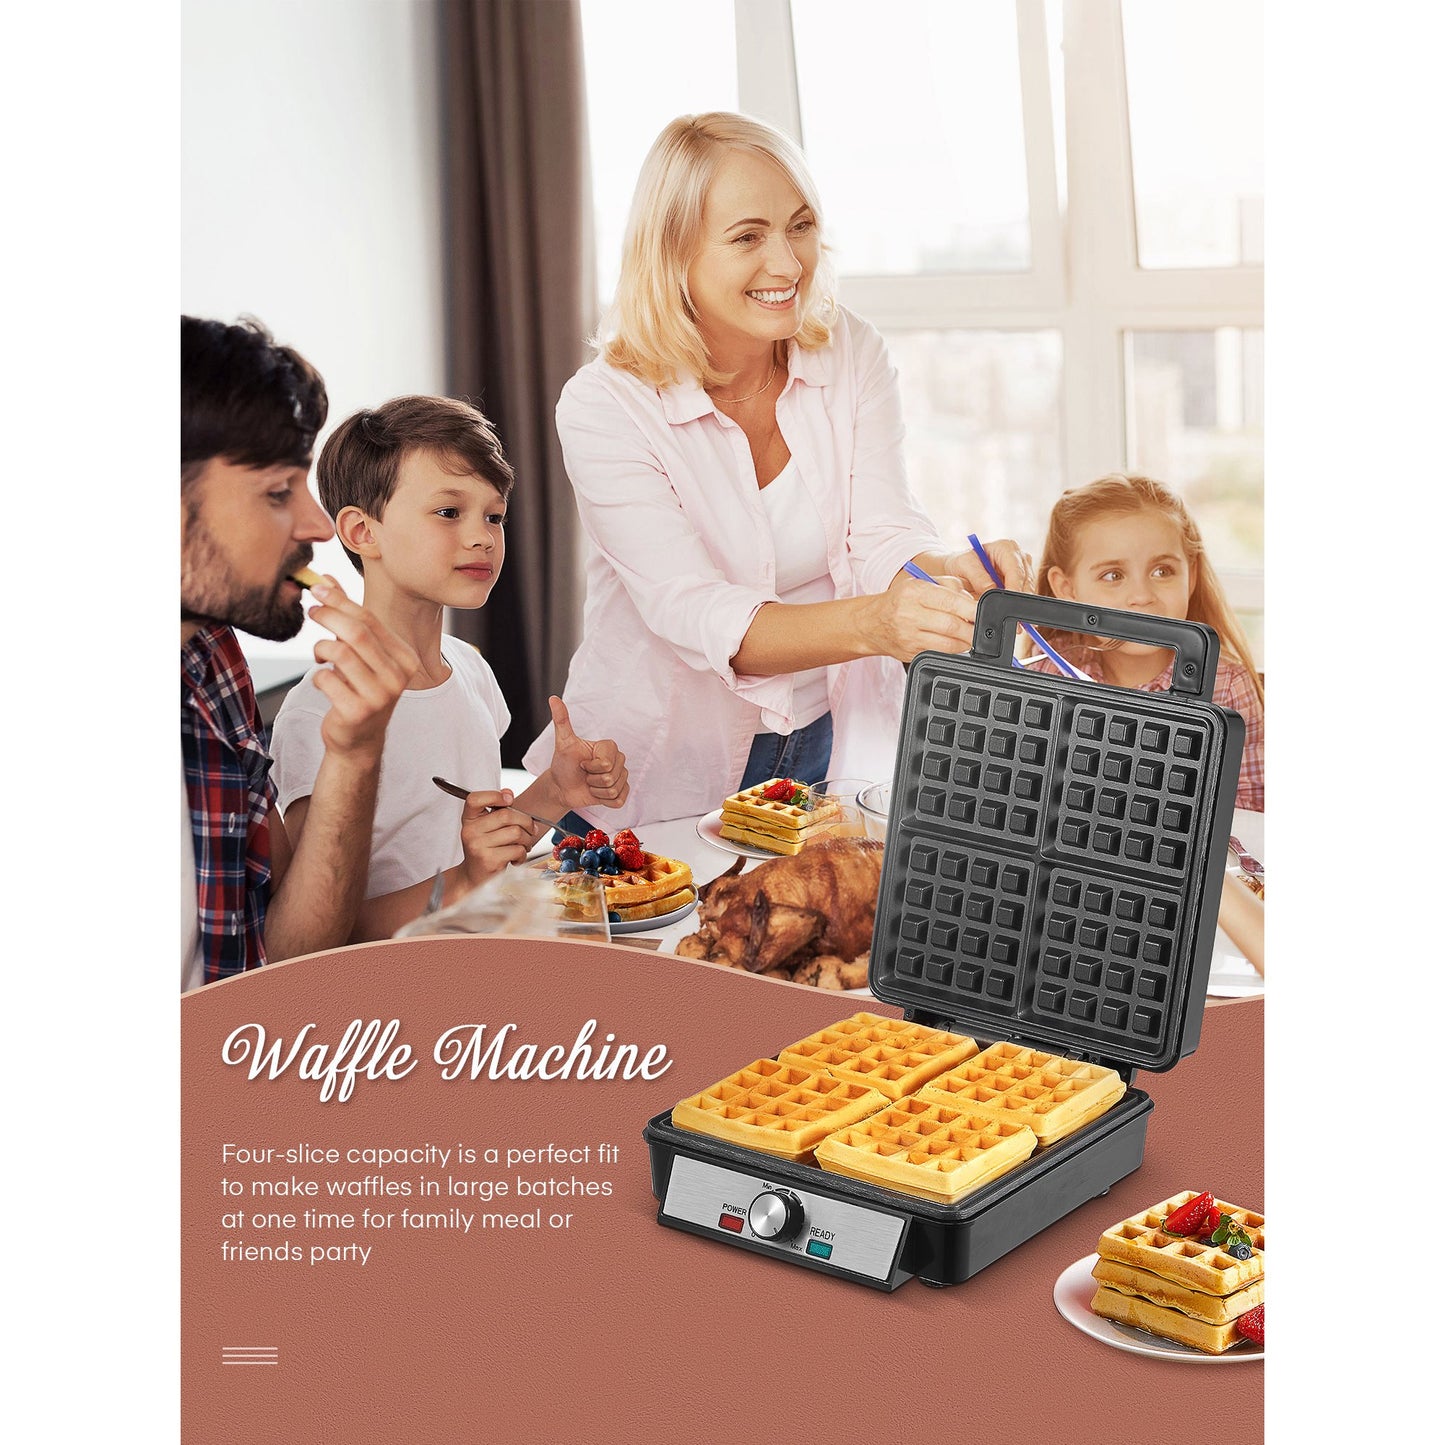 Belgian Waffle Maker 4 Slices with Temperature Control, 1200W, Stainless Steel, Black / Silver